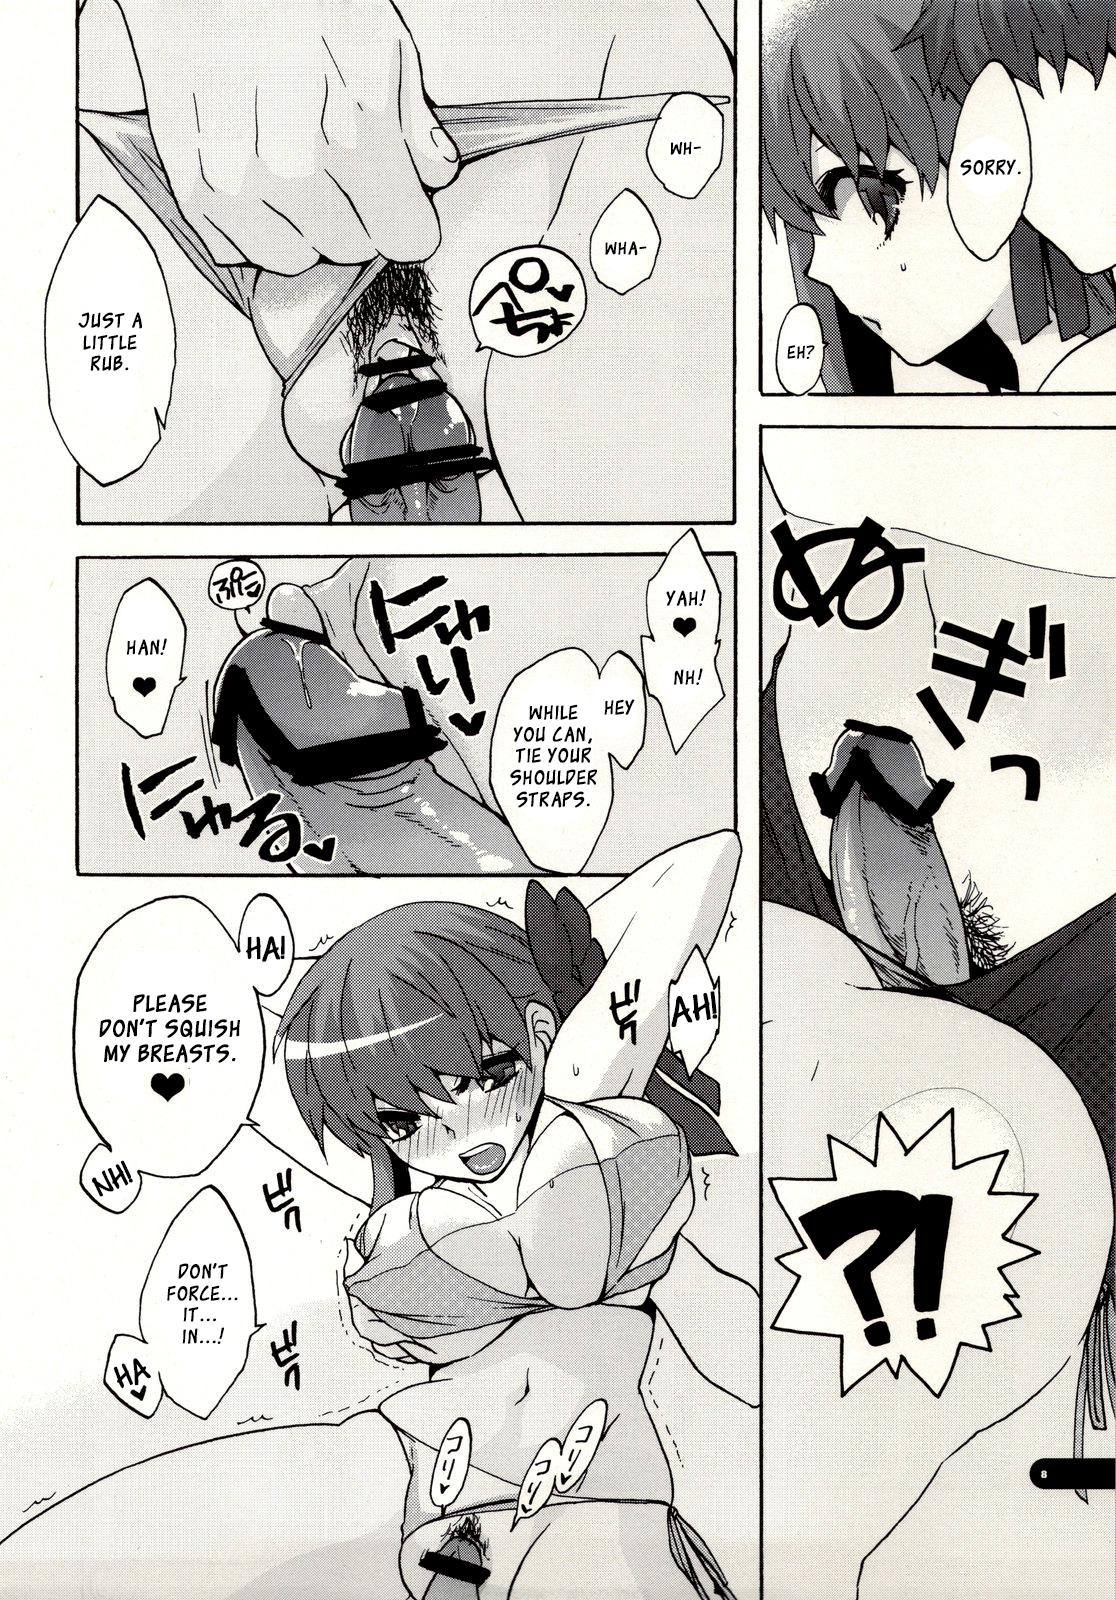 Fucking FOOL POOL - Fate stay night Audition - Page 8